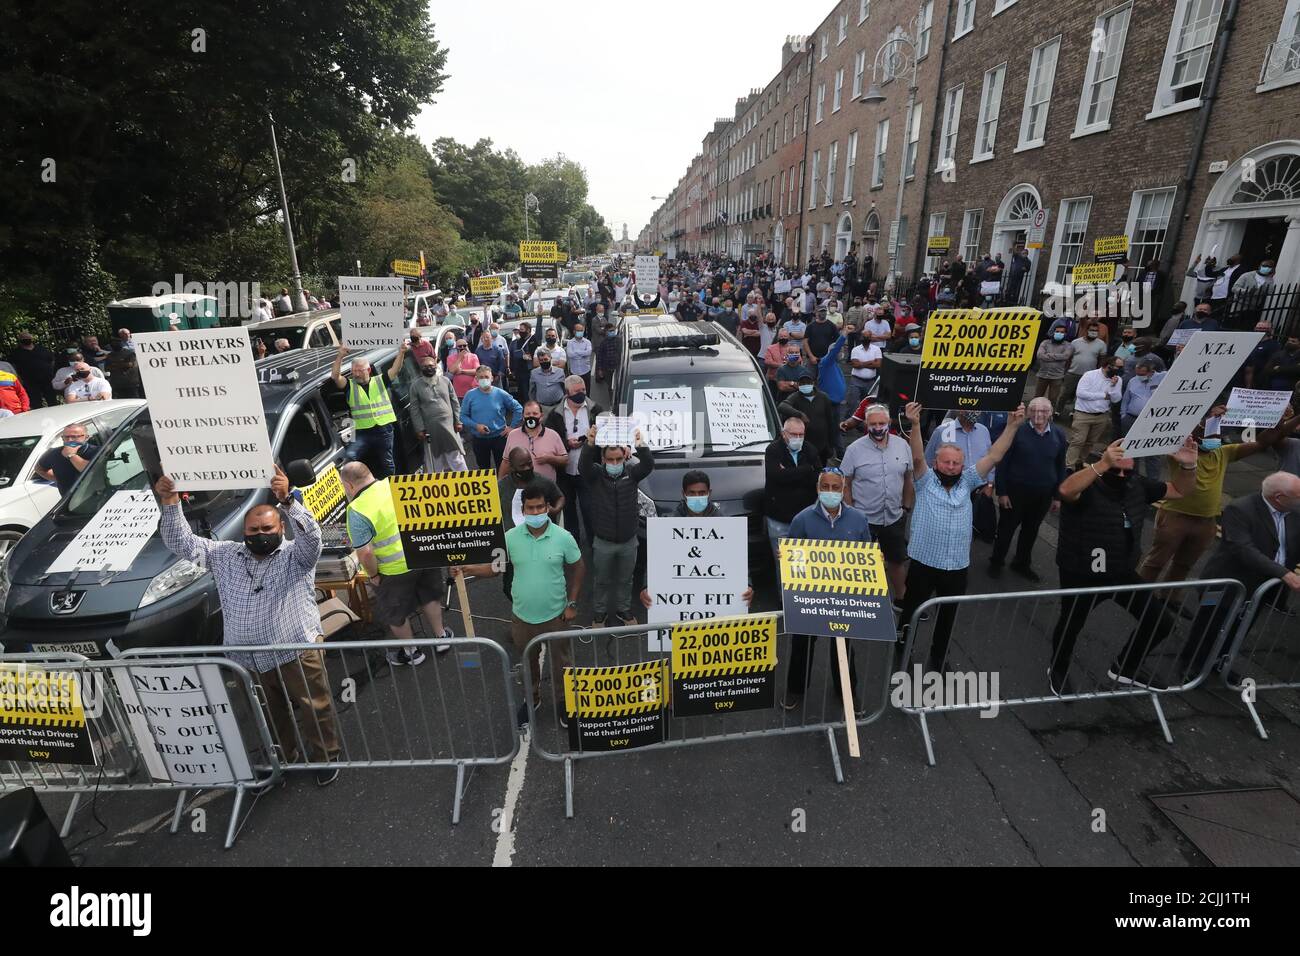 Taxi drivers at a barricade take part in a protest in Merrion Square, Dublin, calling for greater support from the National Taxi Association (NTA) during the coronavirus pandemic which has left businesses hit hard. Stock Photo